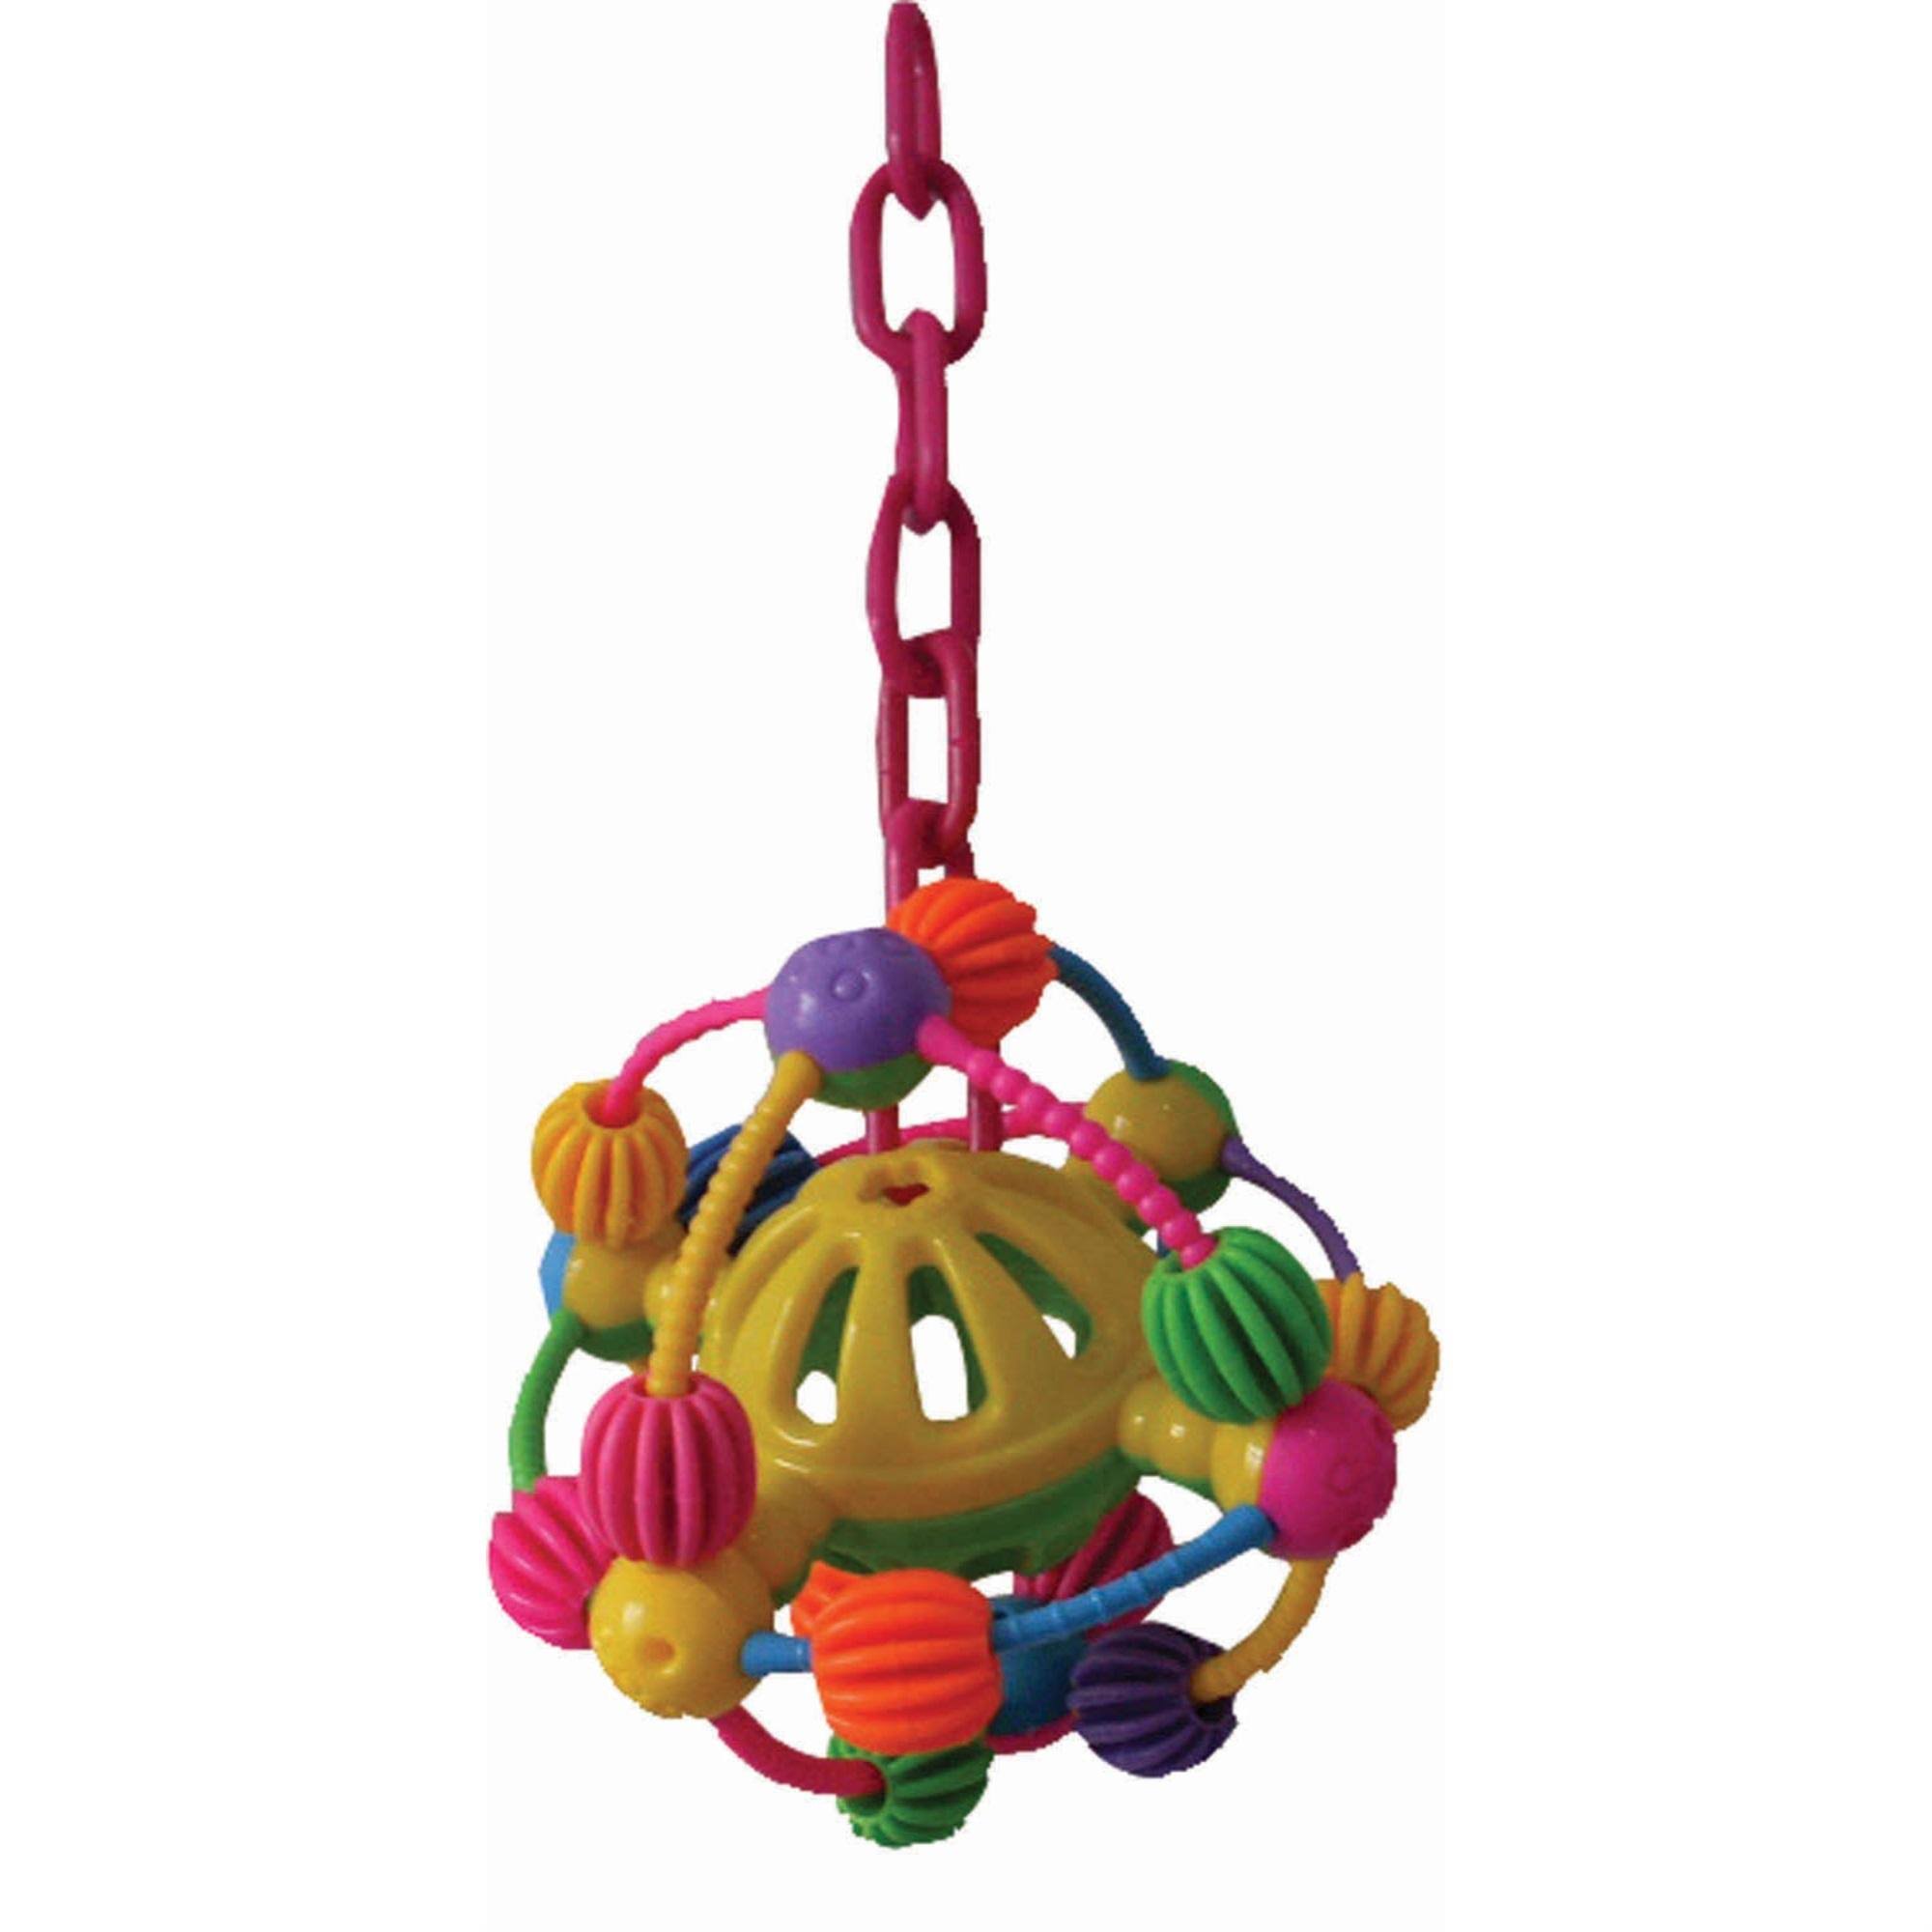 Space Ball on a Chain Pet Bird Toy